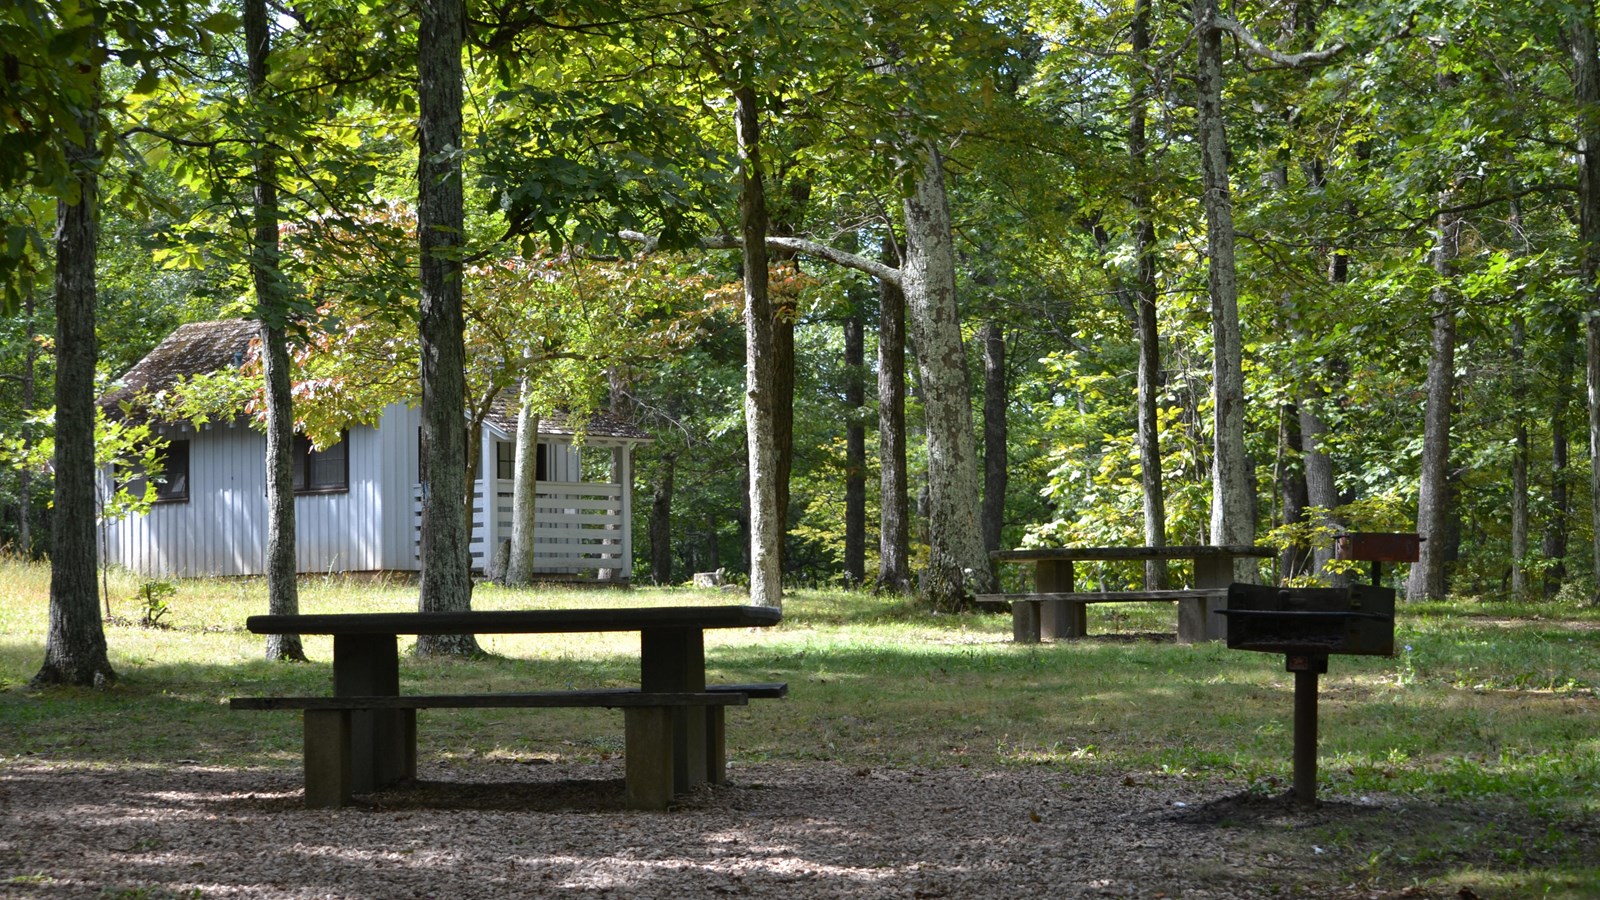 A picnic table and standing grill sit on level ground in the shade of tall trees.